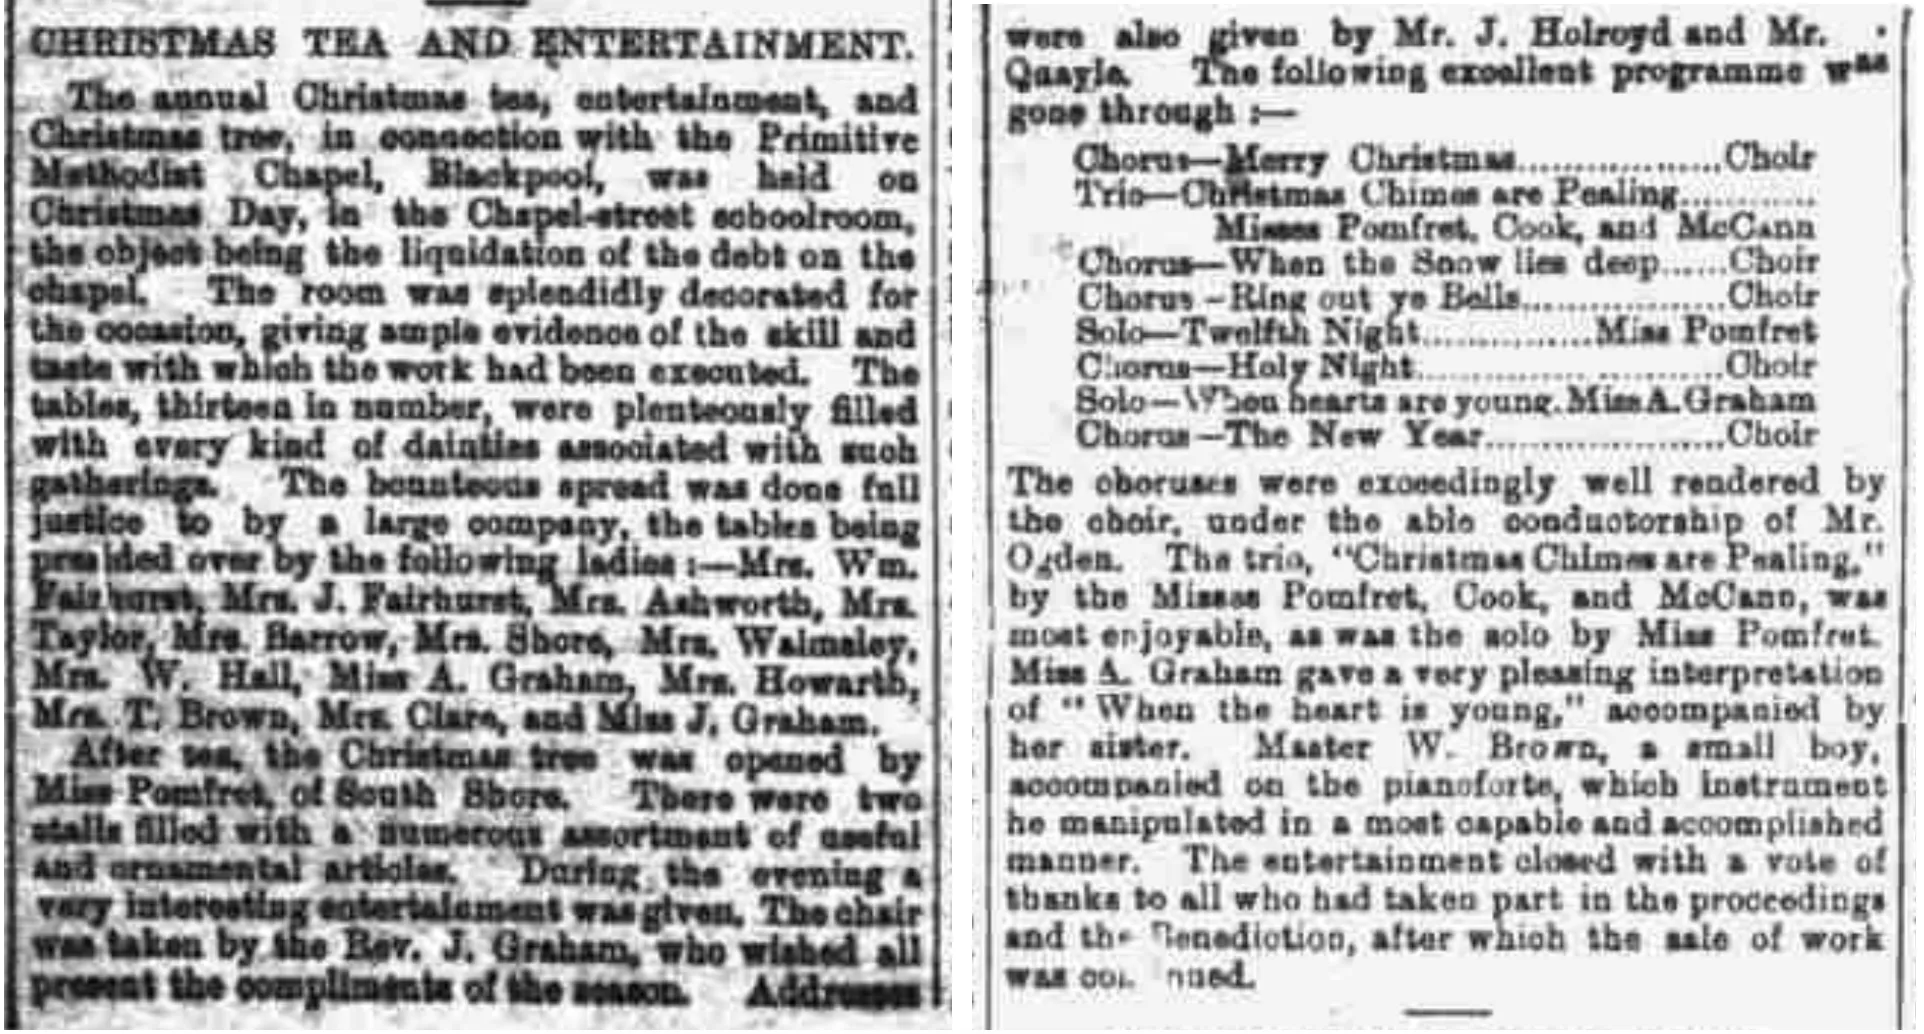 1888 newspaper cutting about the Christmas Tea and Entertainment at Chapel Street Methodist Church